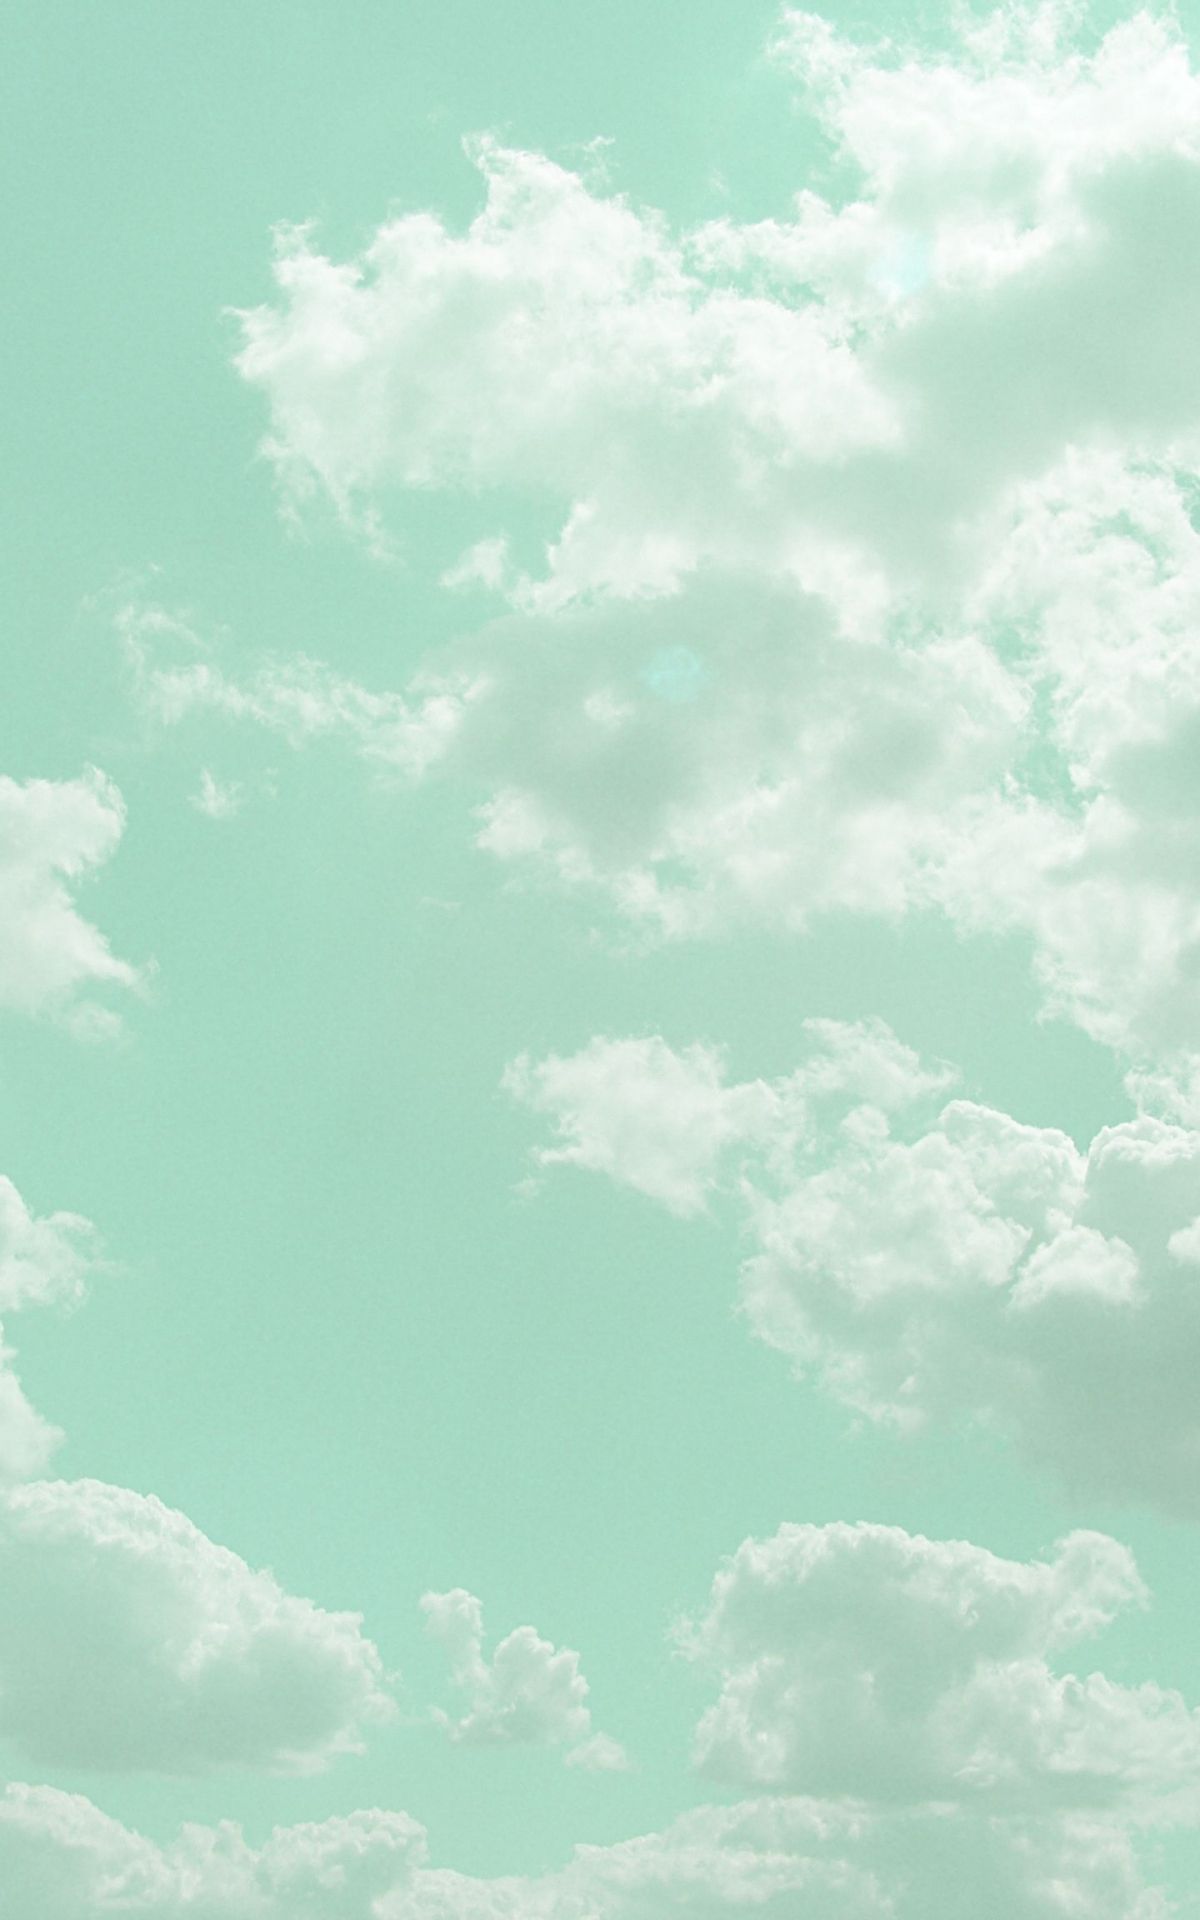 A light blue sky with white clouds - Mint green, pastel green, cloud